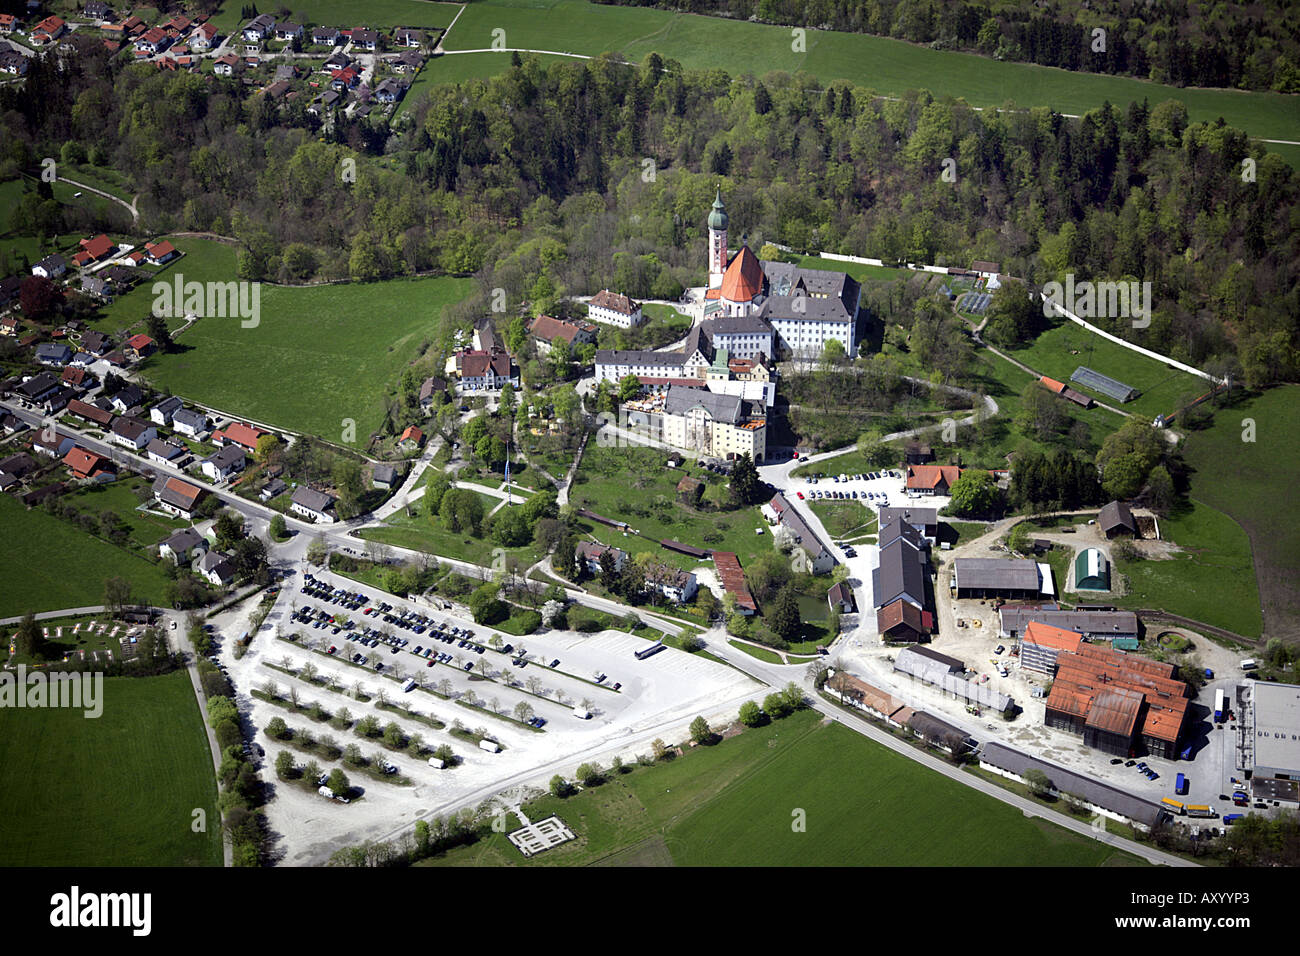 andechs-monastery-church-monastery-brewery-and-beer-garden-germany